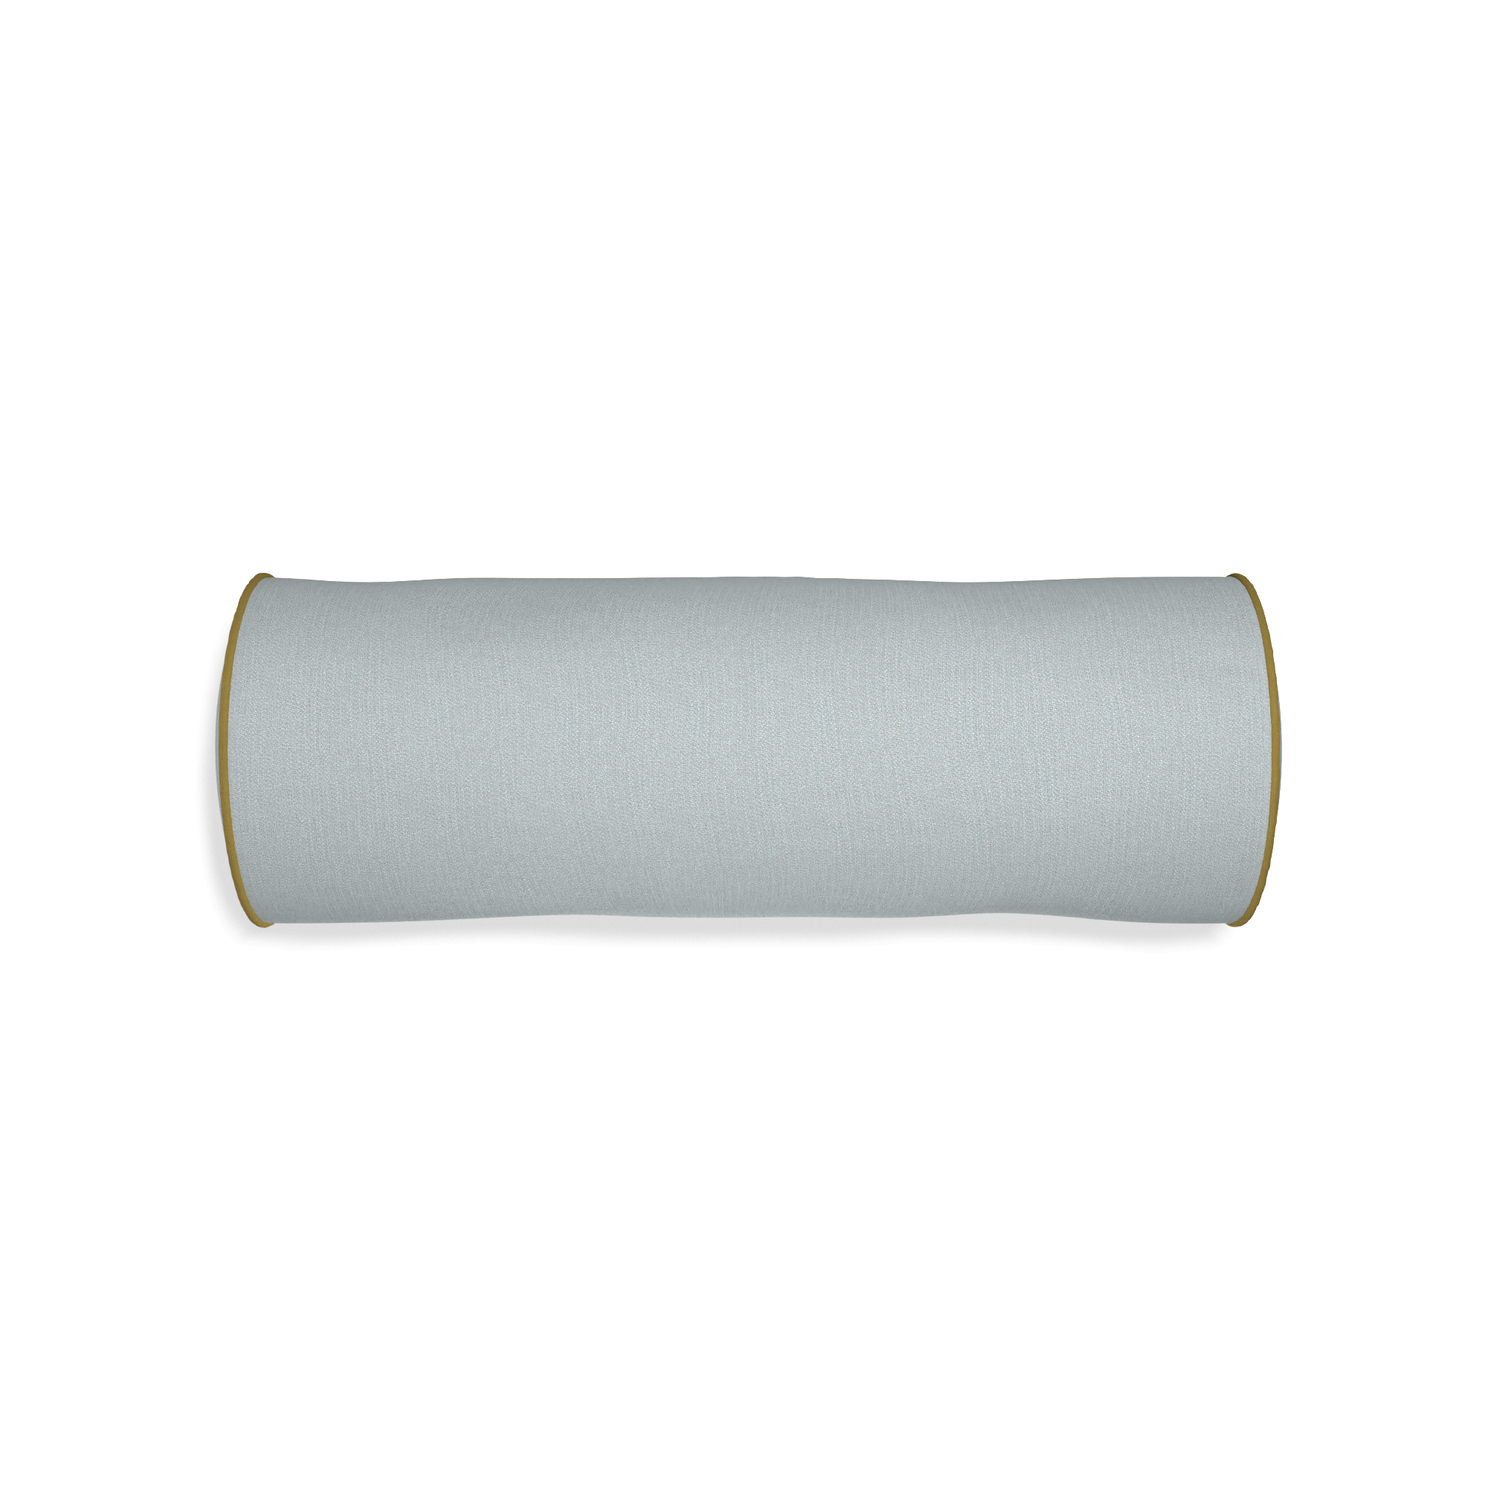 Bolster sea custom grey bluepillow with c piping on white background